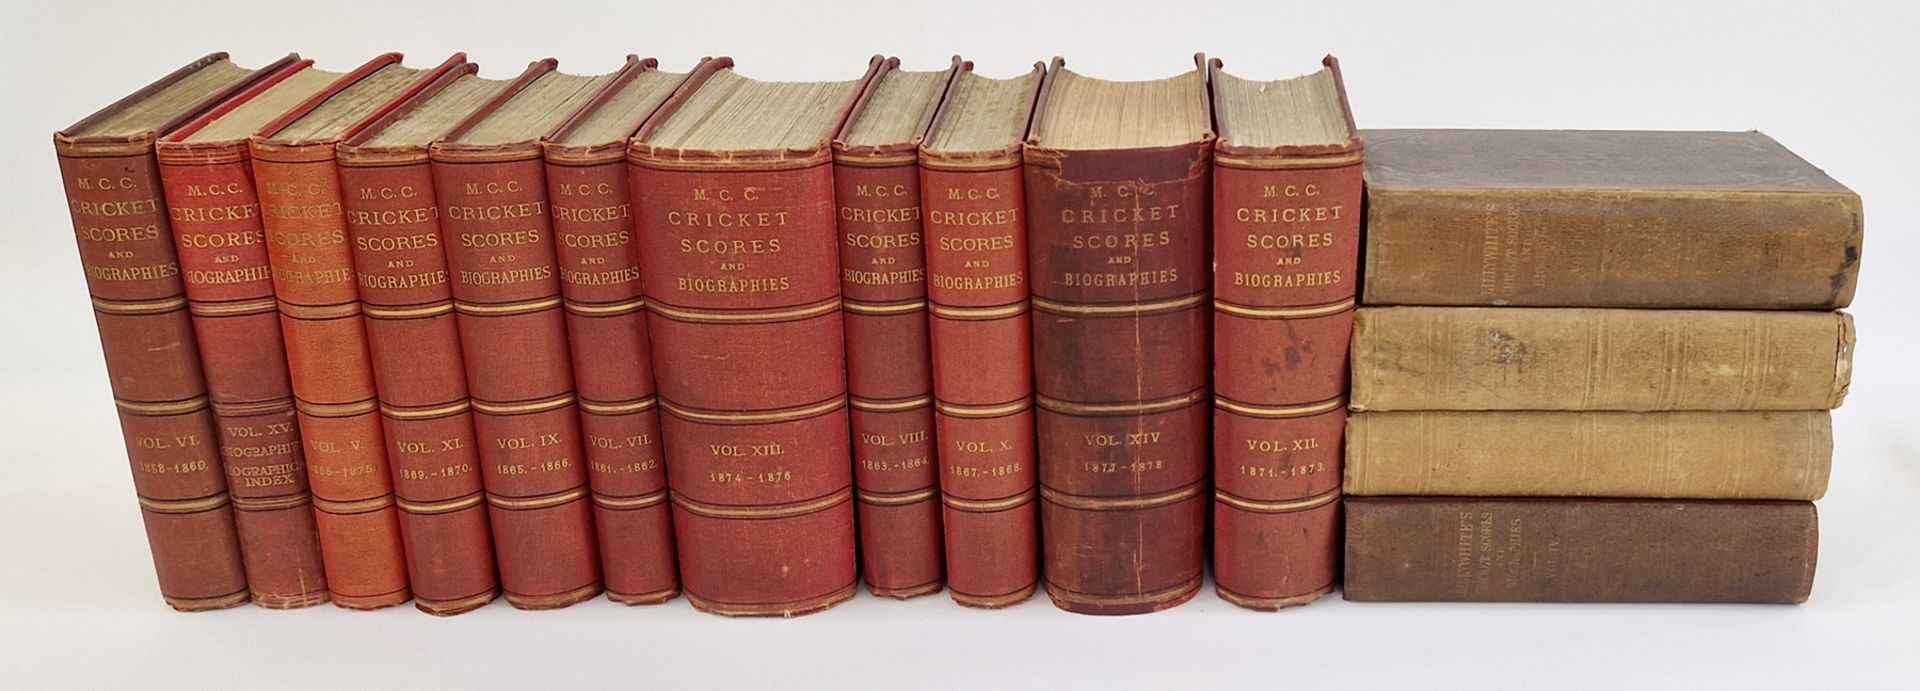 MCC Cricket Scores and Biographies - 11 vols from vol 5 to vol 14, vol 5 1855-1875 through to vol 14